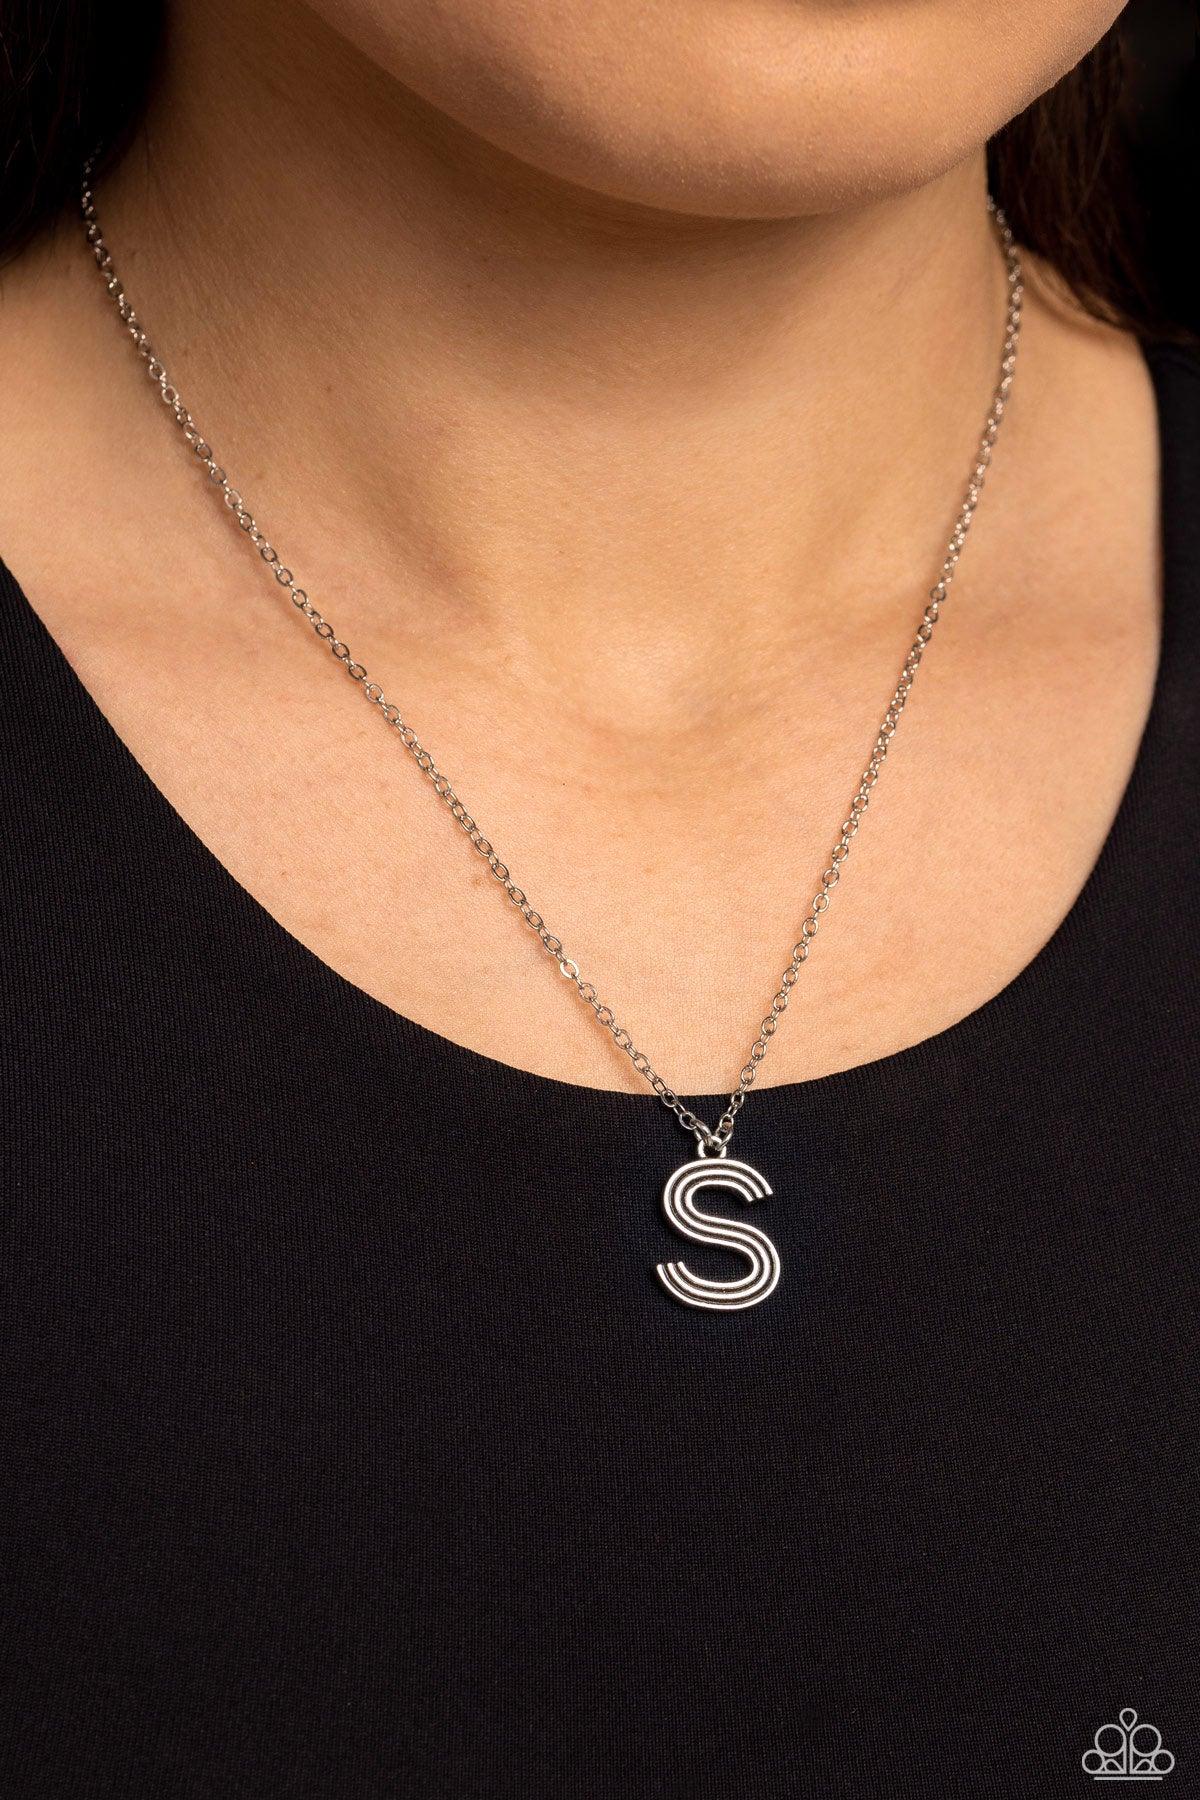 Paparazzi Accessories - Leave Your Initials - Silver - S Necklace - Bling by JessieK